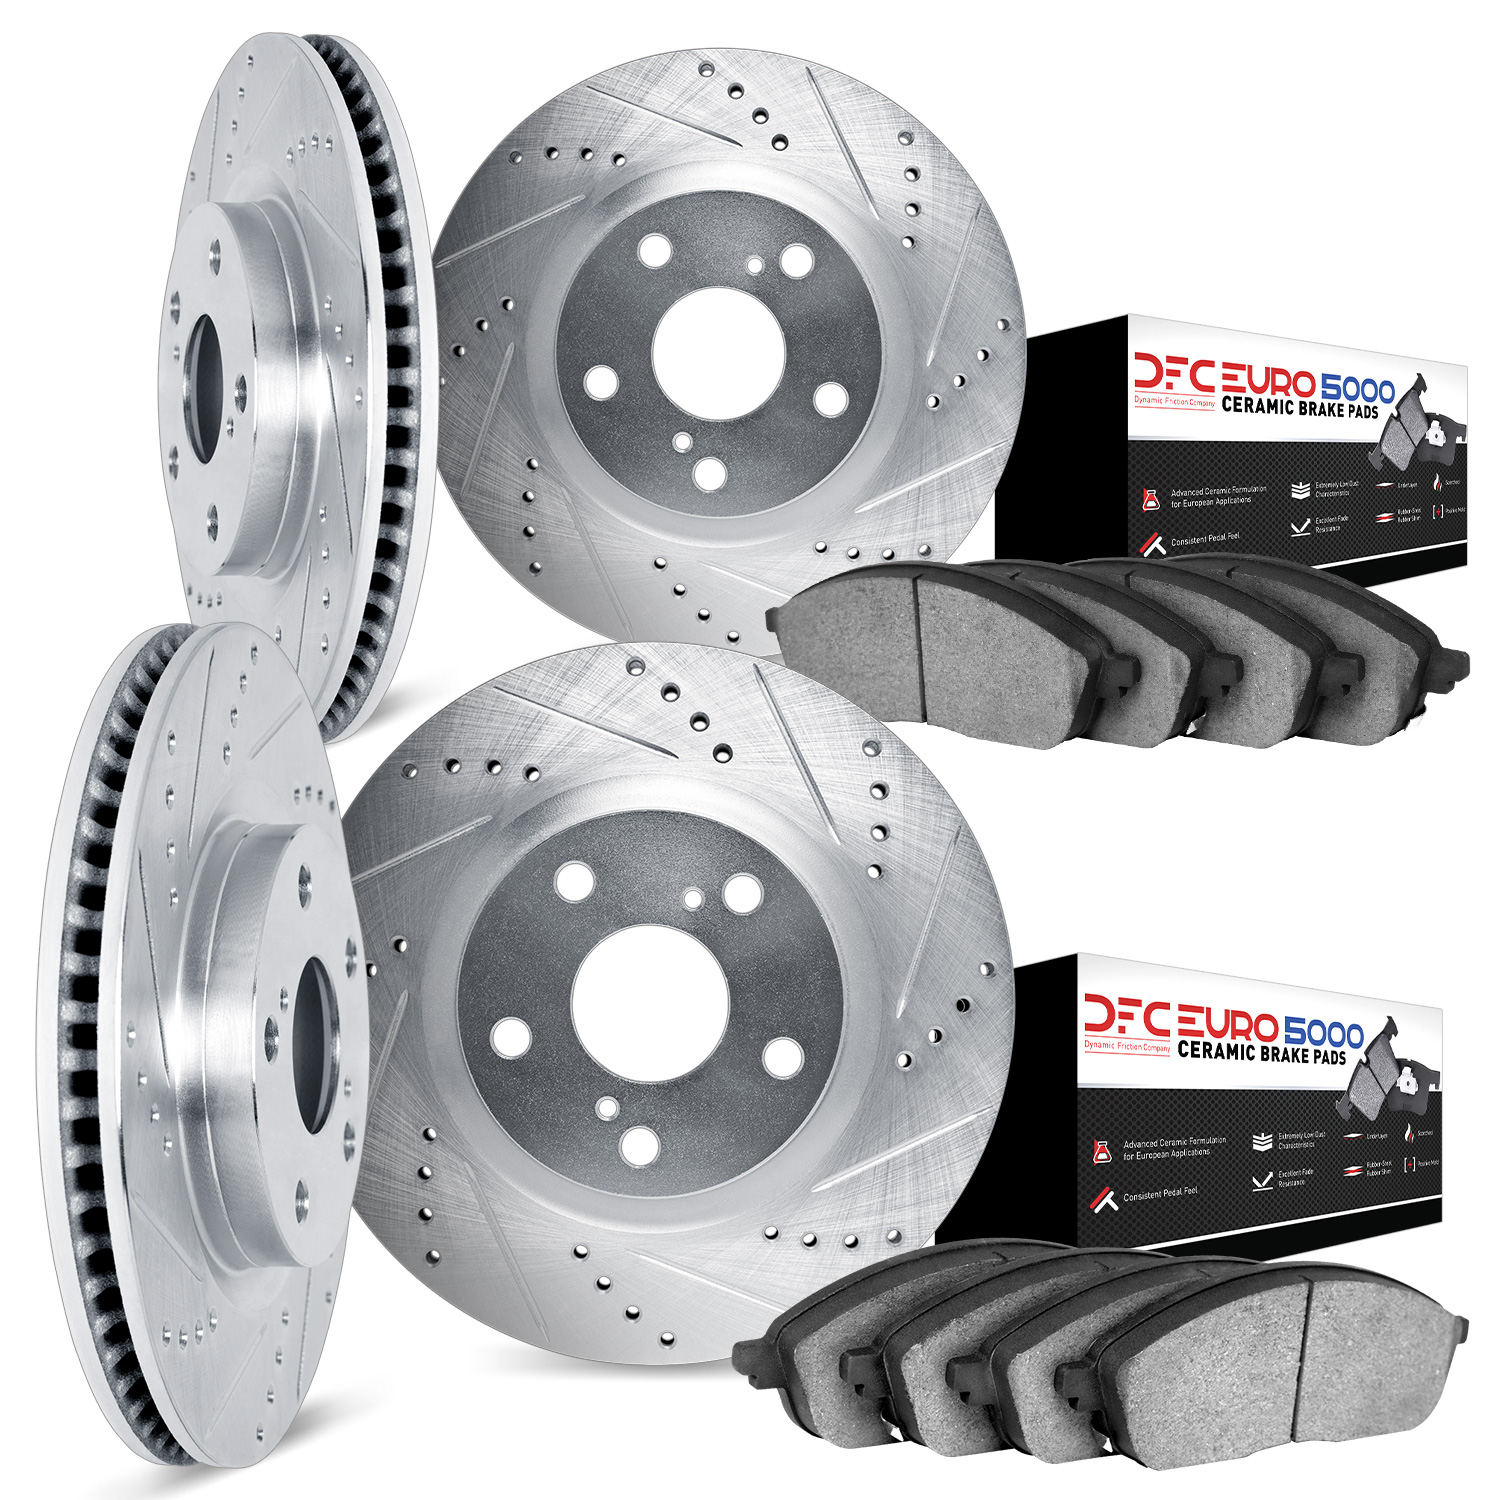 7604-31020 Drilled/Slotted Brake Rotors w/5000 Euro Ceramic Brake Pads Kit [Silver], 2004-2010 BMW, Position: Front and Rear